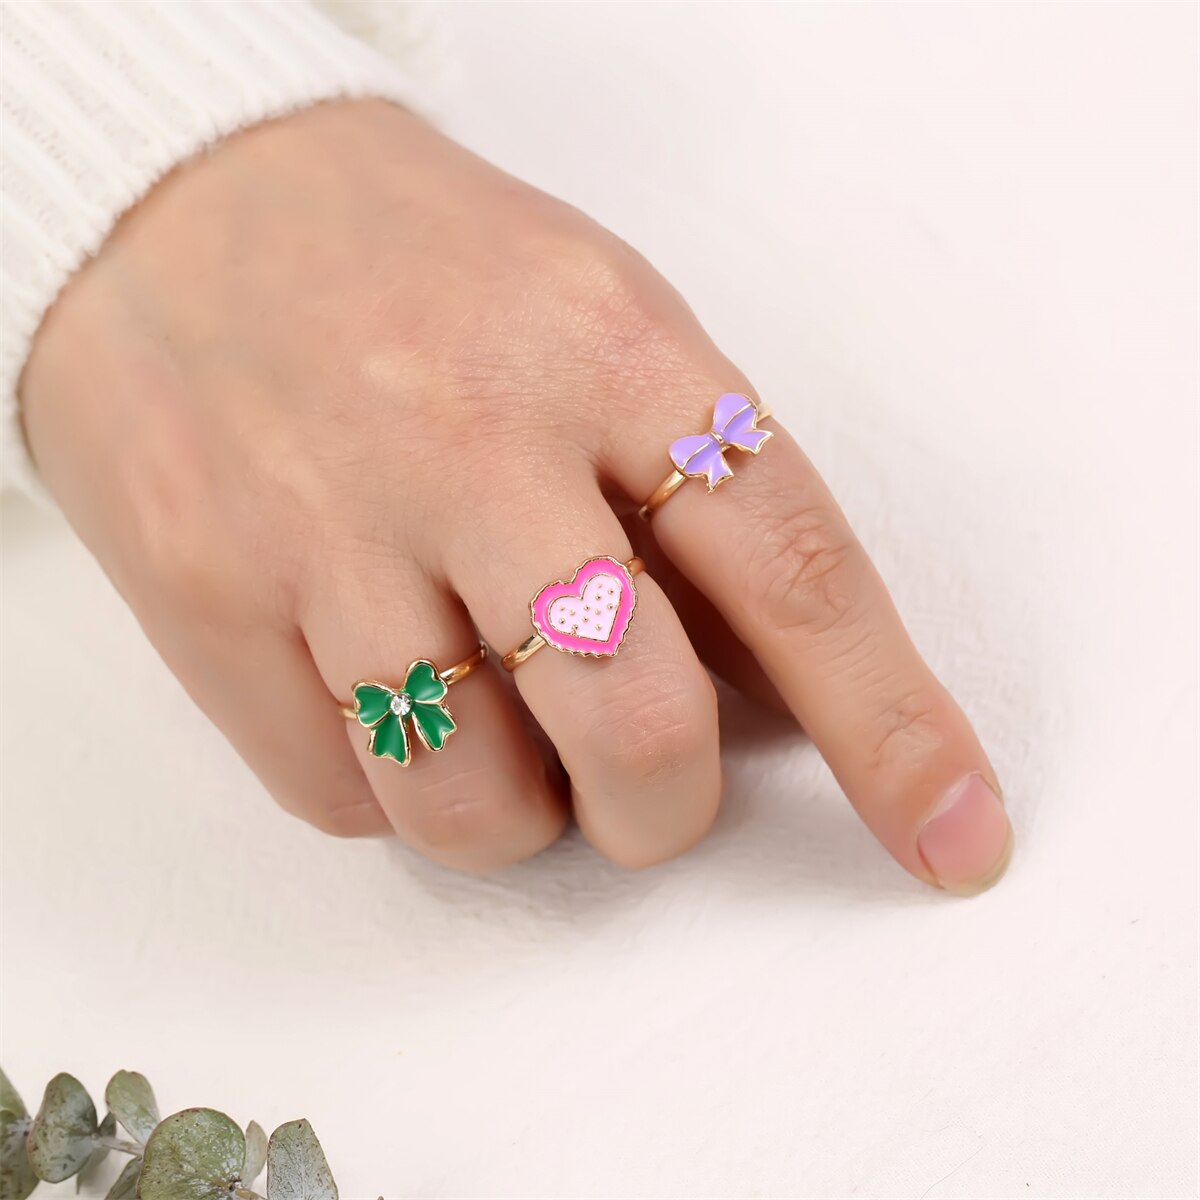 36 PCS/set Adjustable Kids Rings Jewelry Butterfly Rabbit Animal Crystal Open Finger Ring for Children Girls Birthday Party Gift